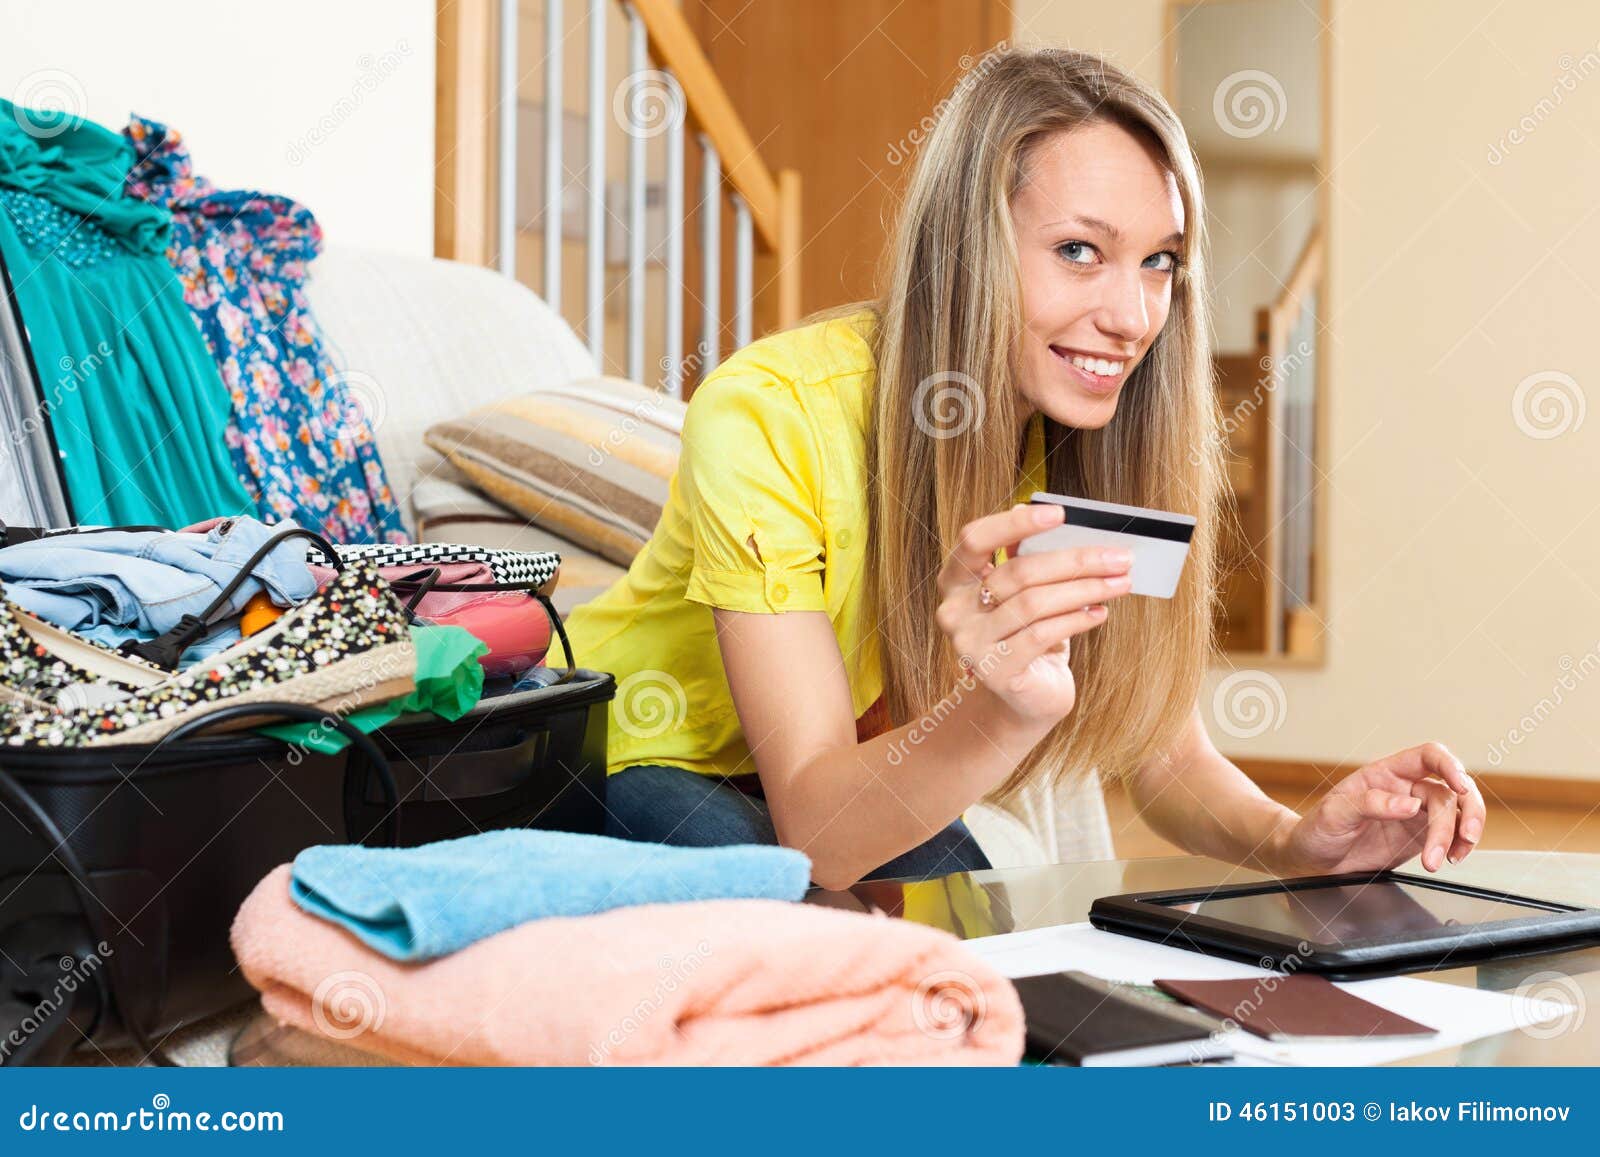 Smiling woman using credit card for reserving plane ticket. Smiling woman using credit card and tablet for reserving plane ticket